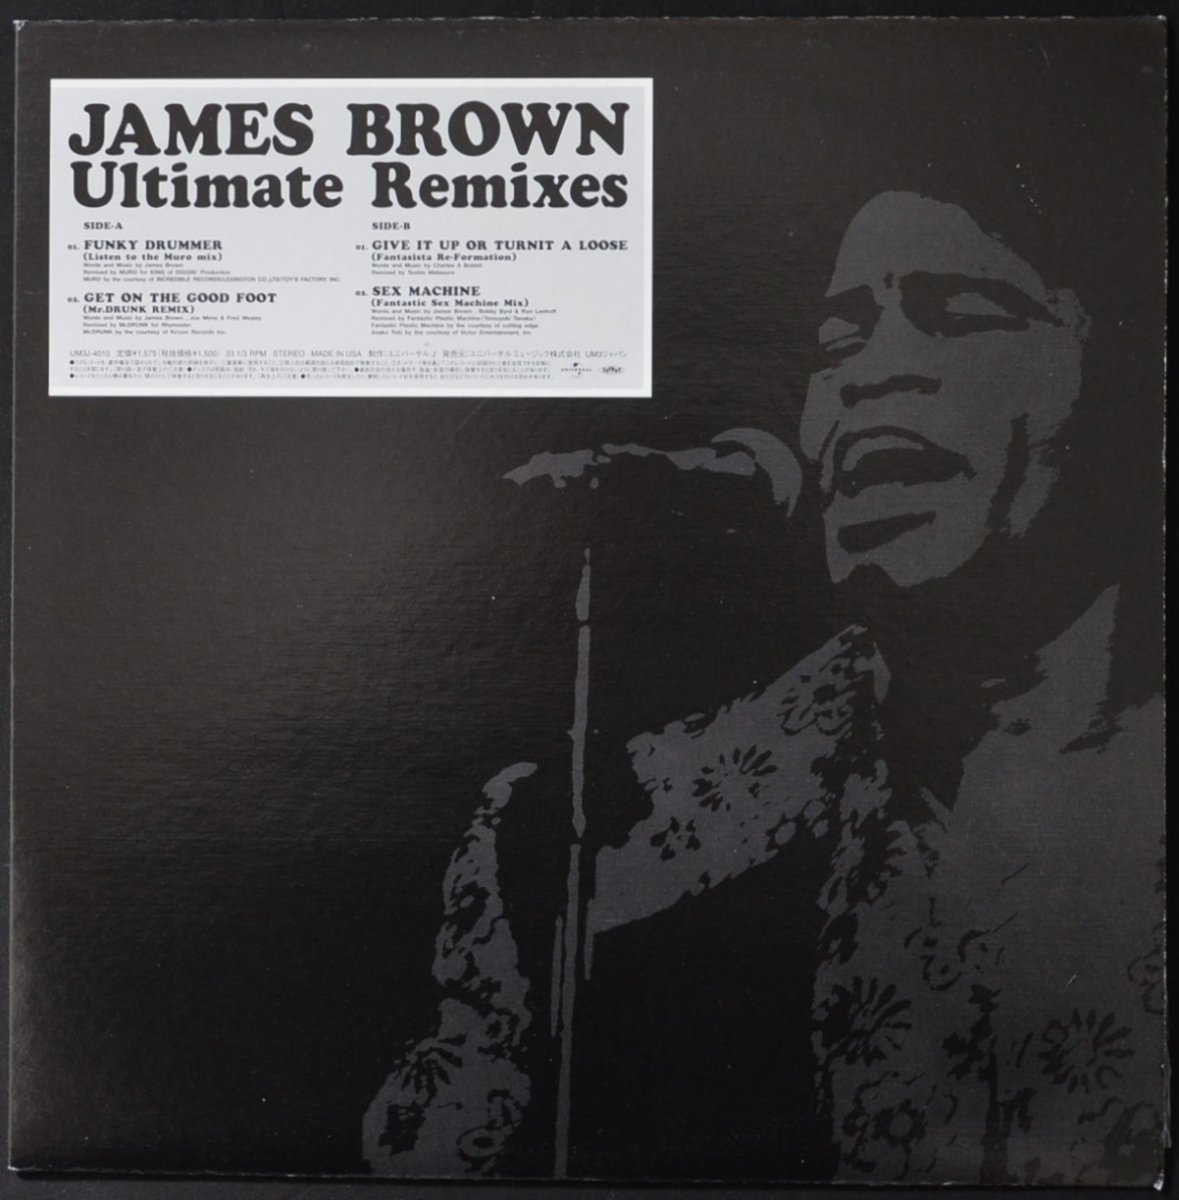 JAMES BROWN / FUNKY DRUMMER (LISTEN TO THE MURO MIX) (ULTIMATE REMIXES) (12